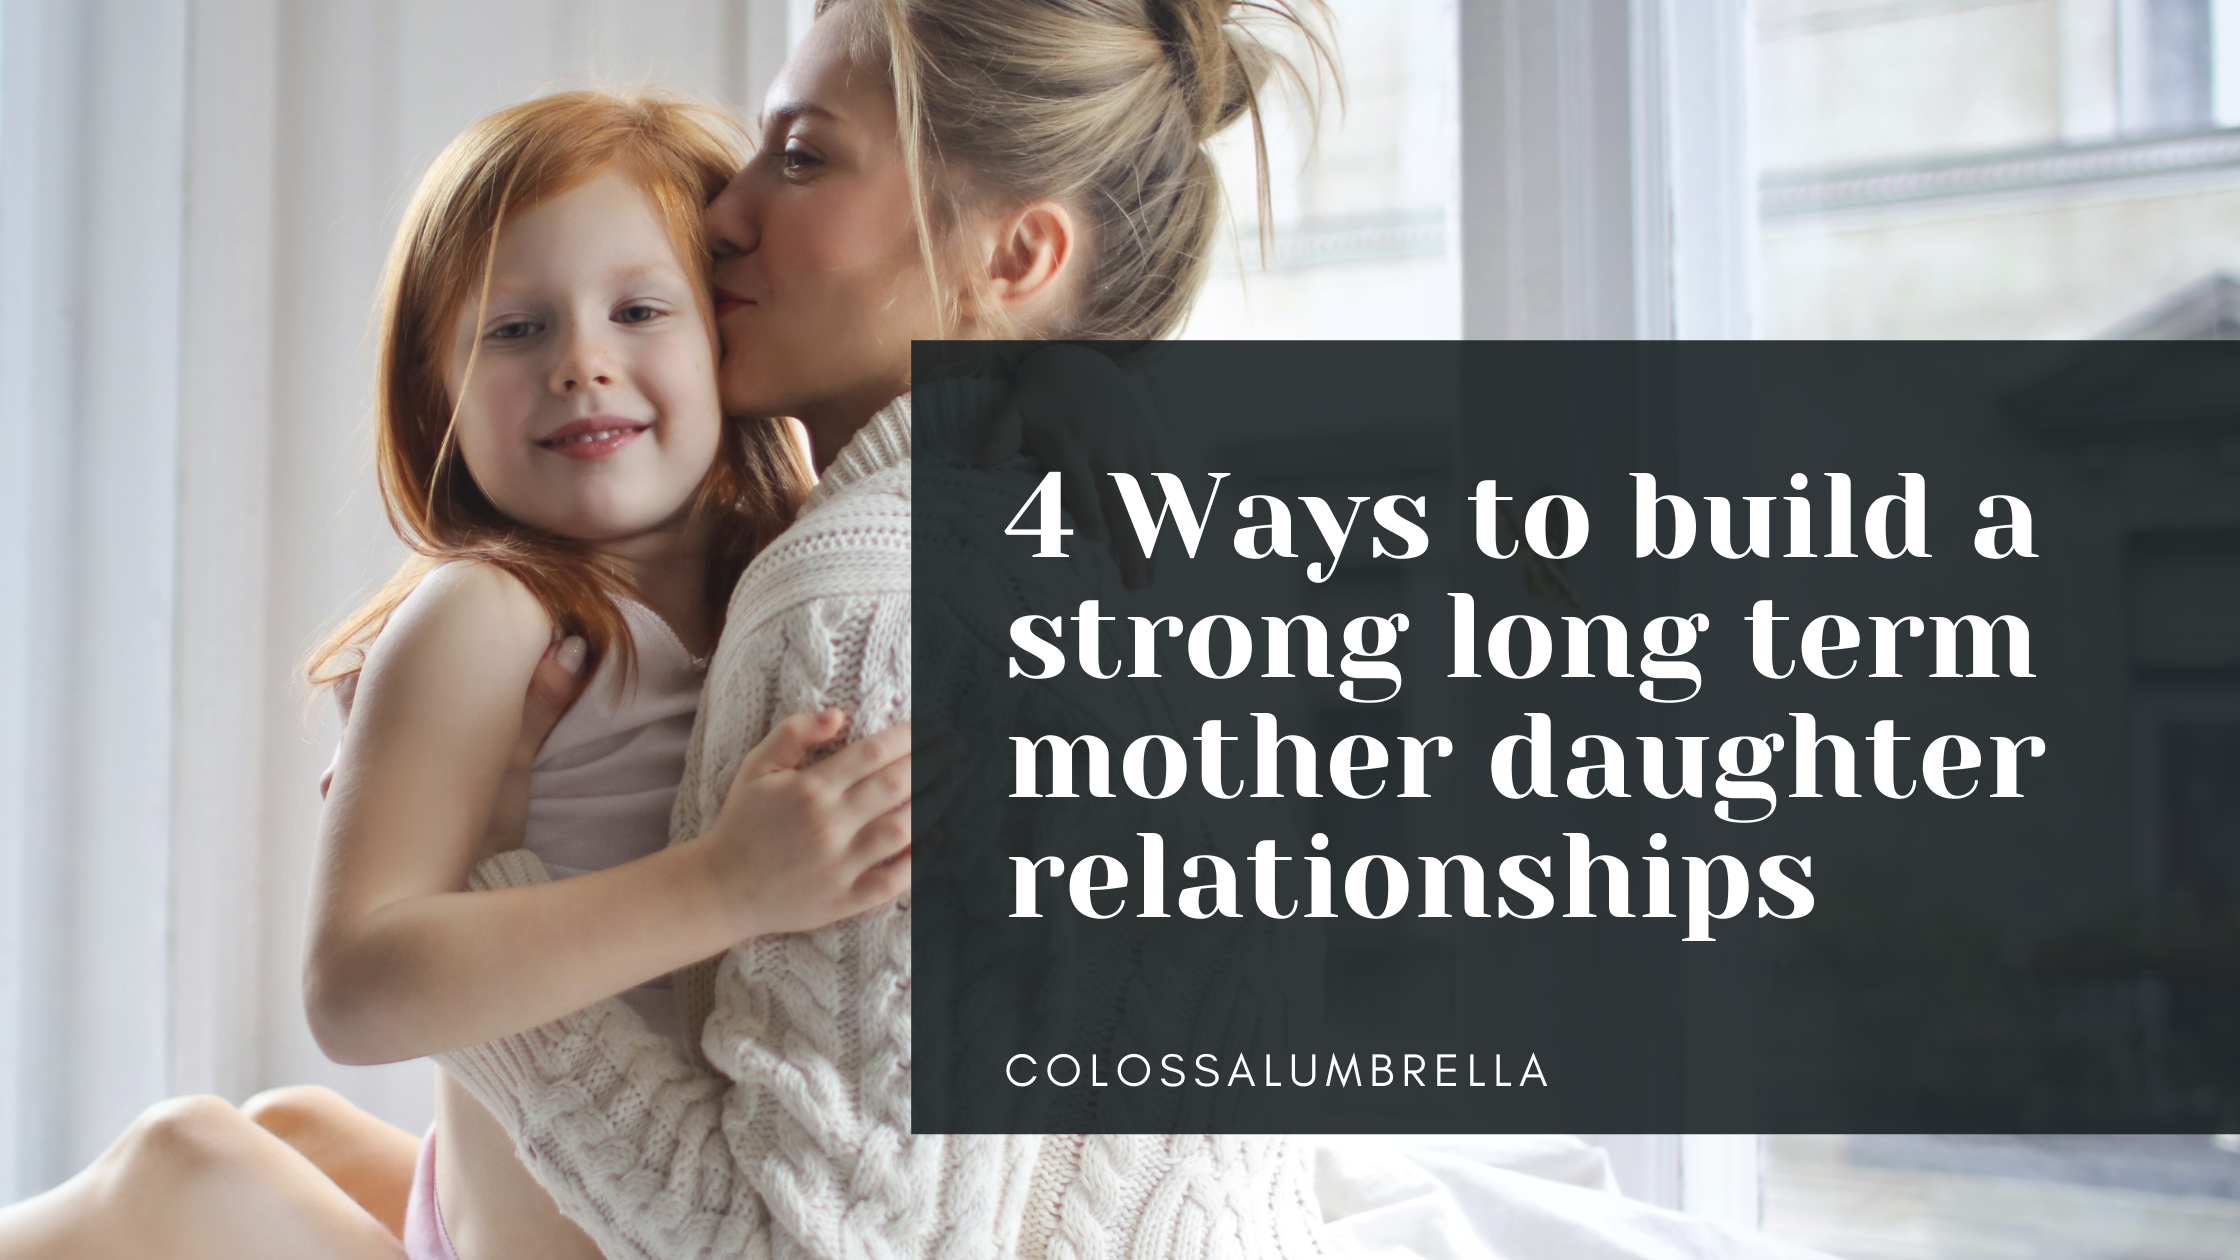 4 Ways to build a strong long term mother daughter relationships